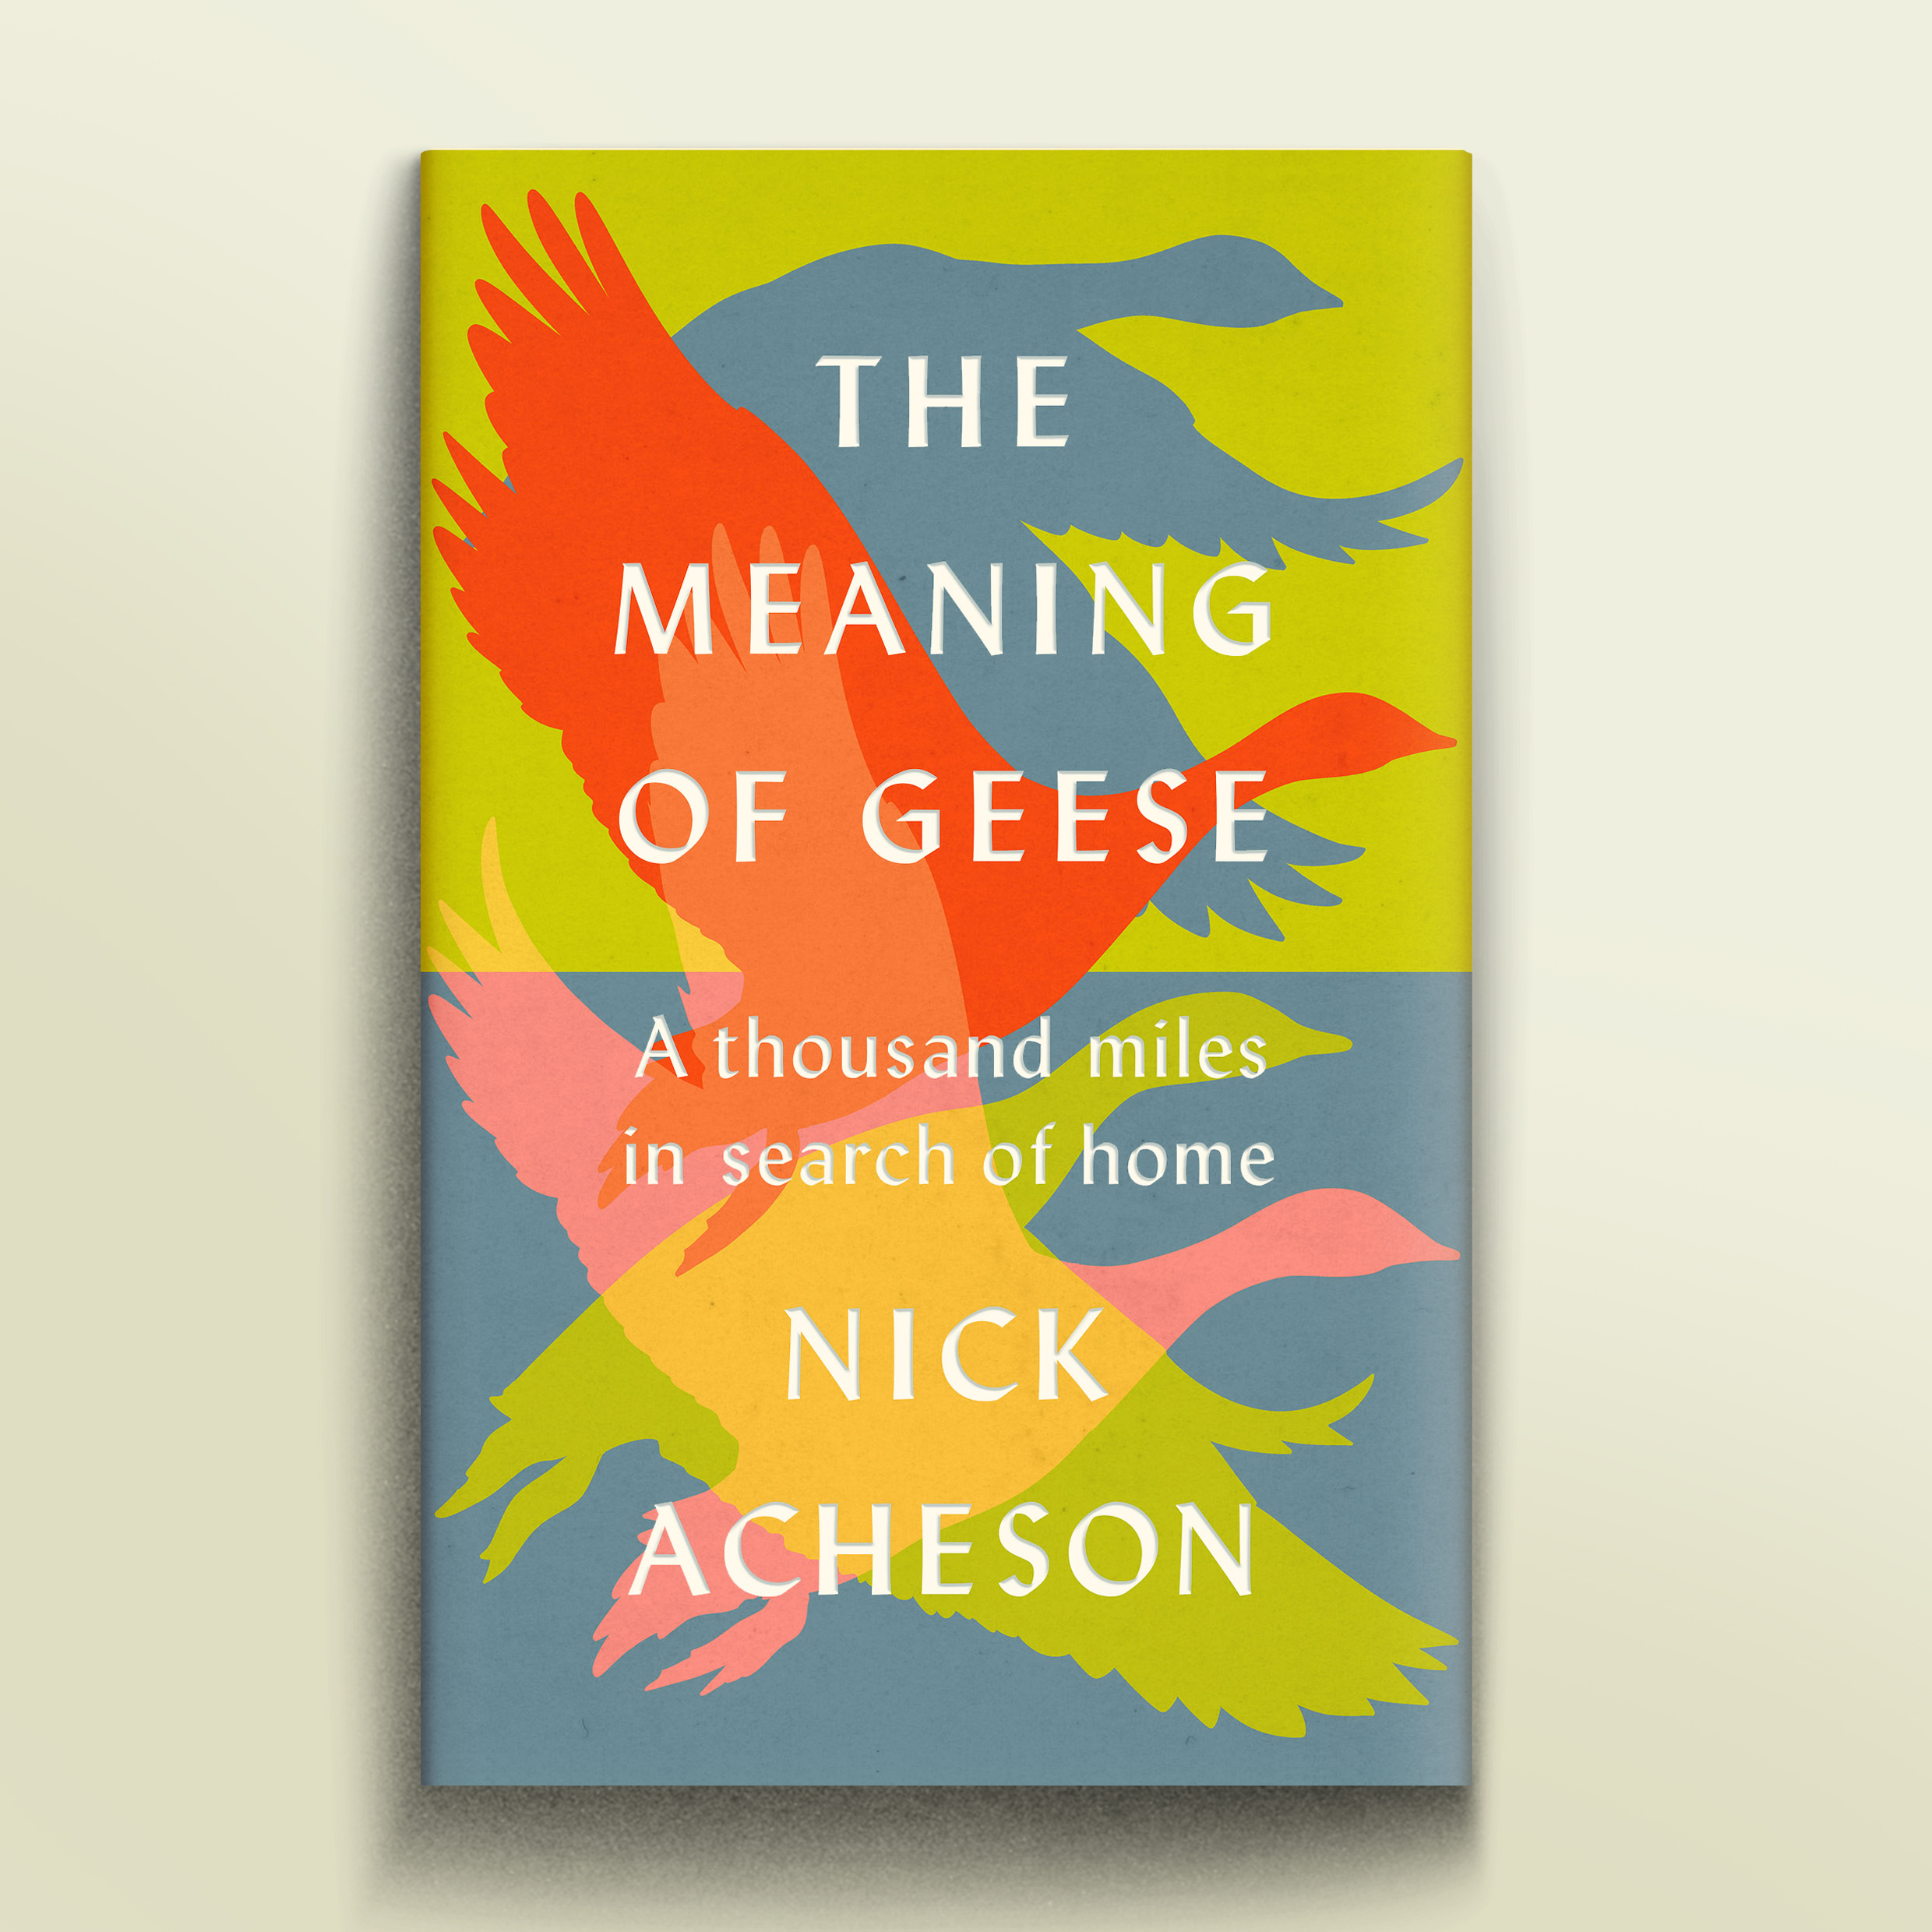 A copy of a yellow, orange, pink and blue book cover reminscent of the sky at sunset, with four flying geese silhouetted  on it.  The title is The Meaning of Geee by Nick Acheson